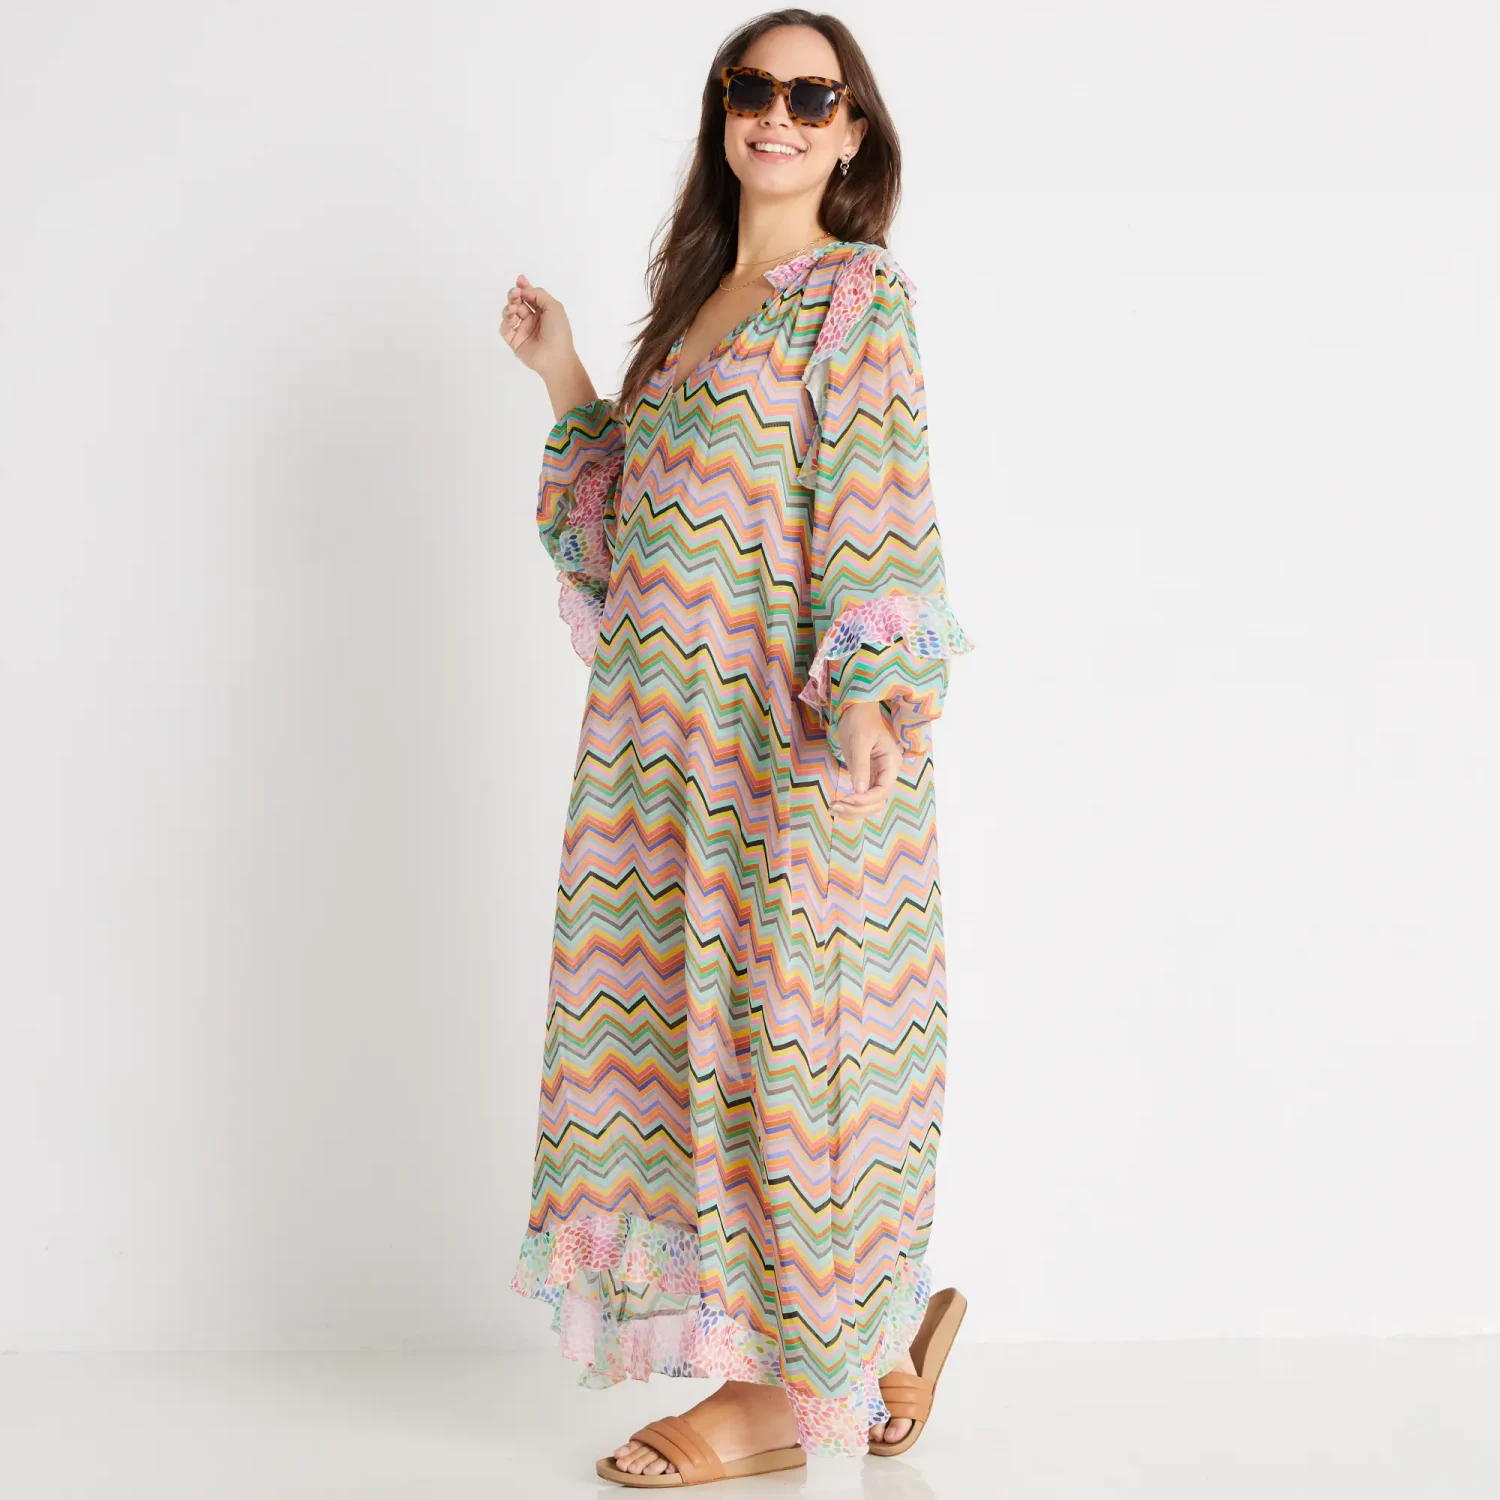 Me369 brand contemporary and stylish maternity friendly printed maxi cover up dresses